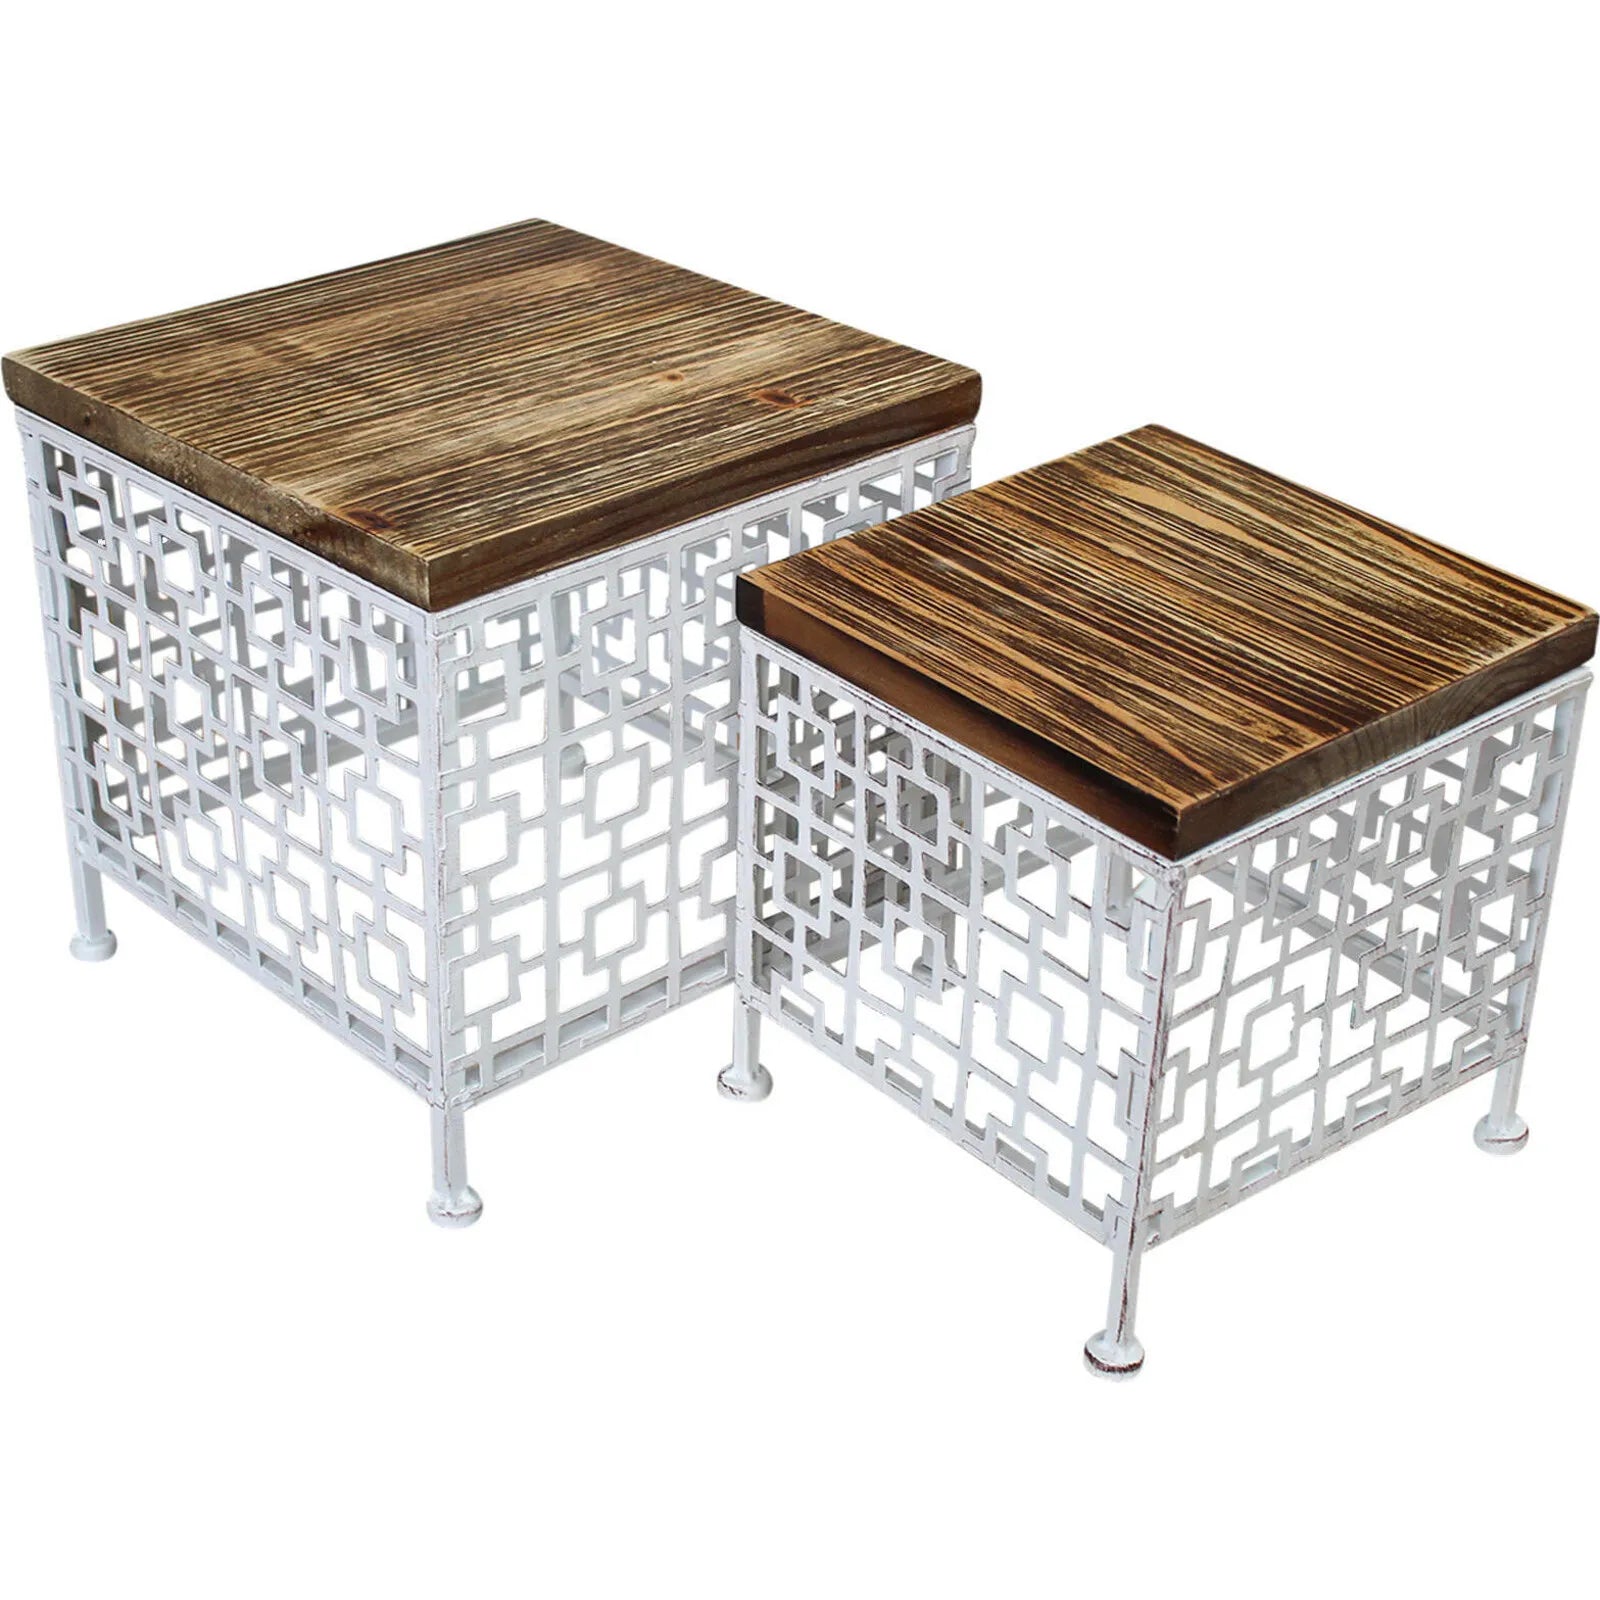 Morroccan plant stands